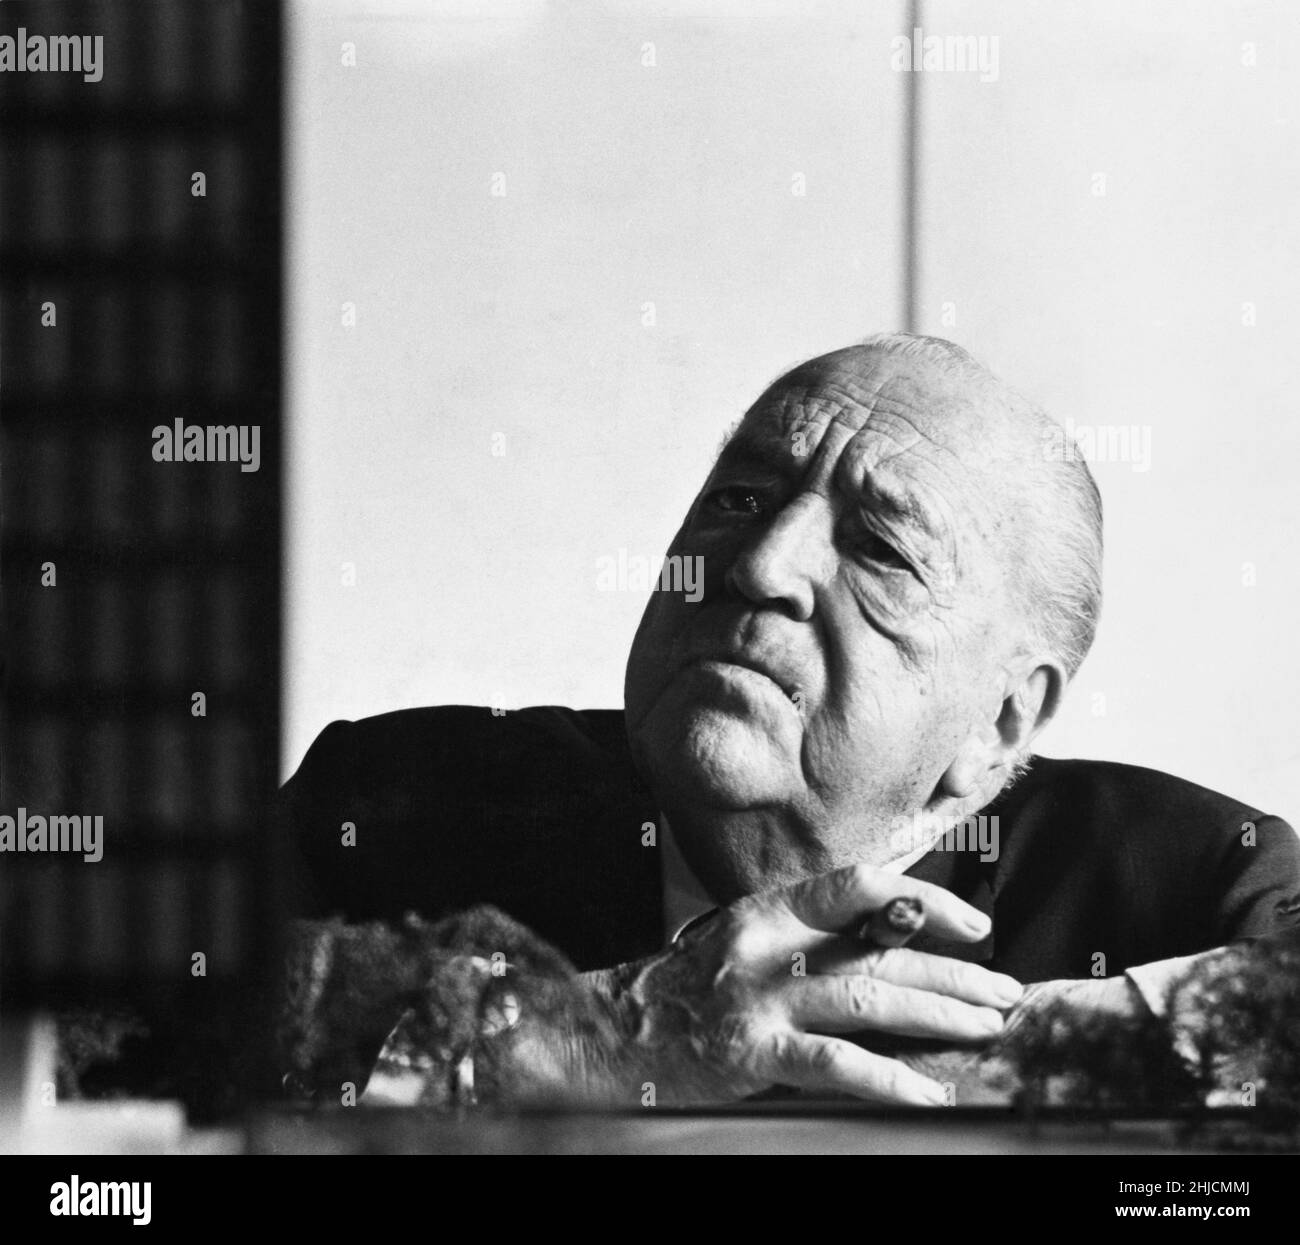 German architect Ludwig Mies van der Rohe (1886 - 1969), widely regarded as a master of modern architecture. Chicago, IL, 1968. Stock Photo